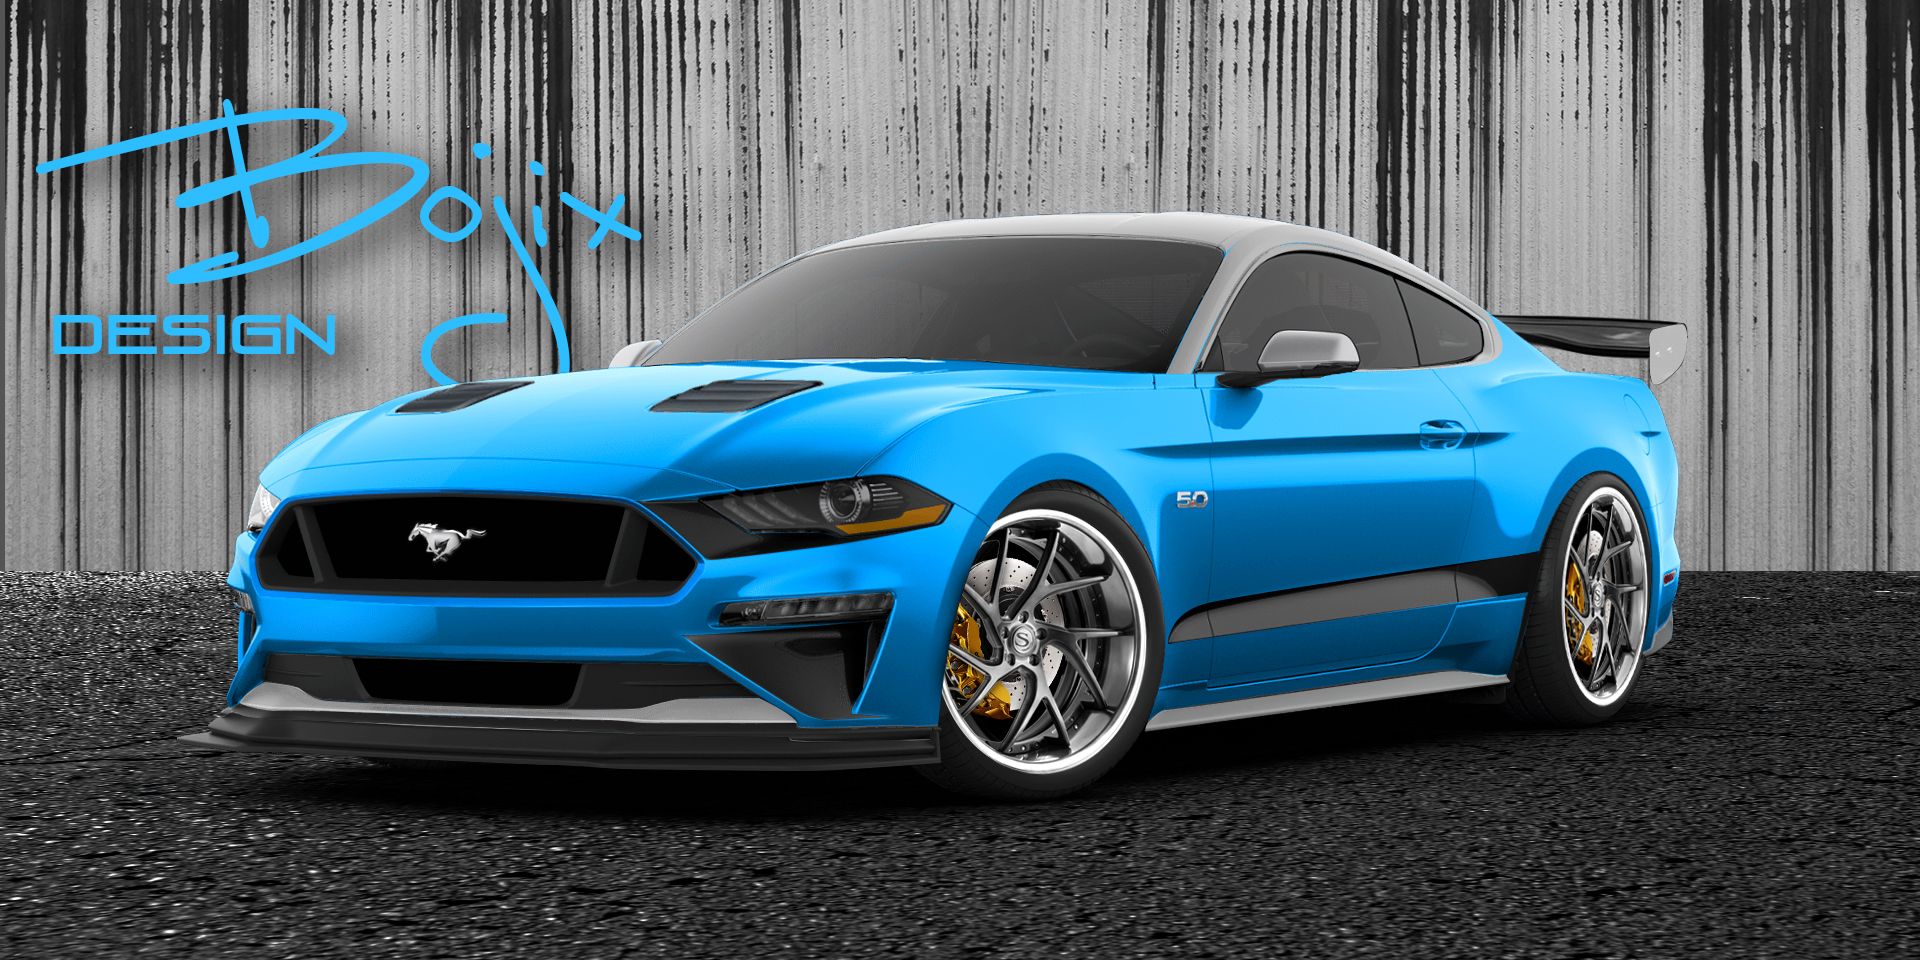 2018 Ford Mustang GT by Bojix Design